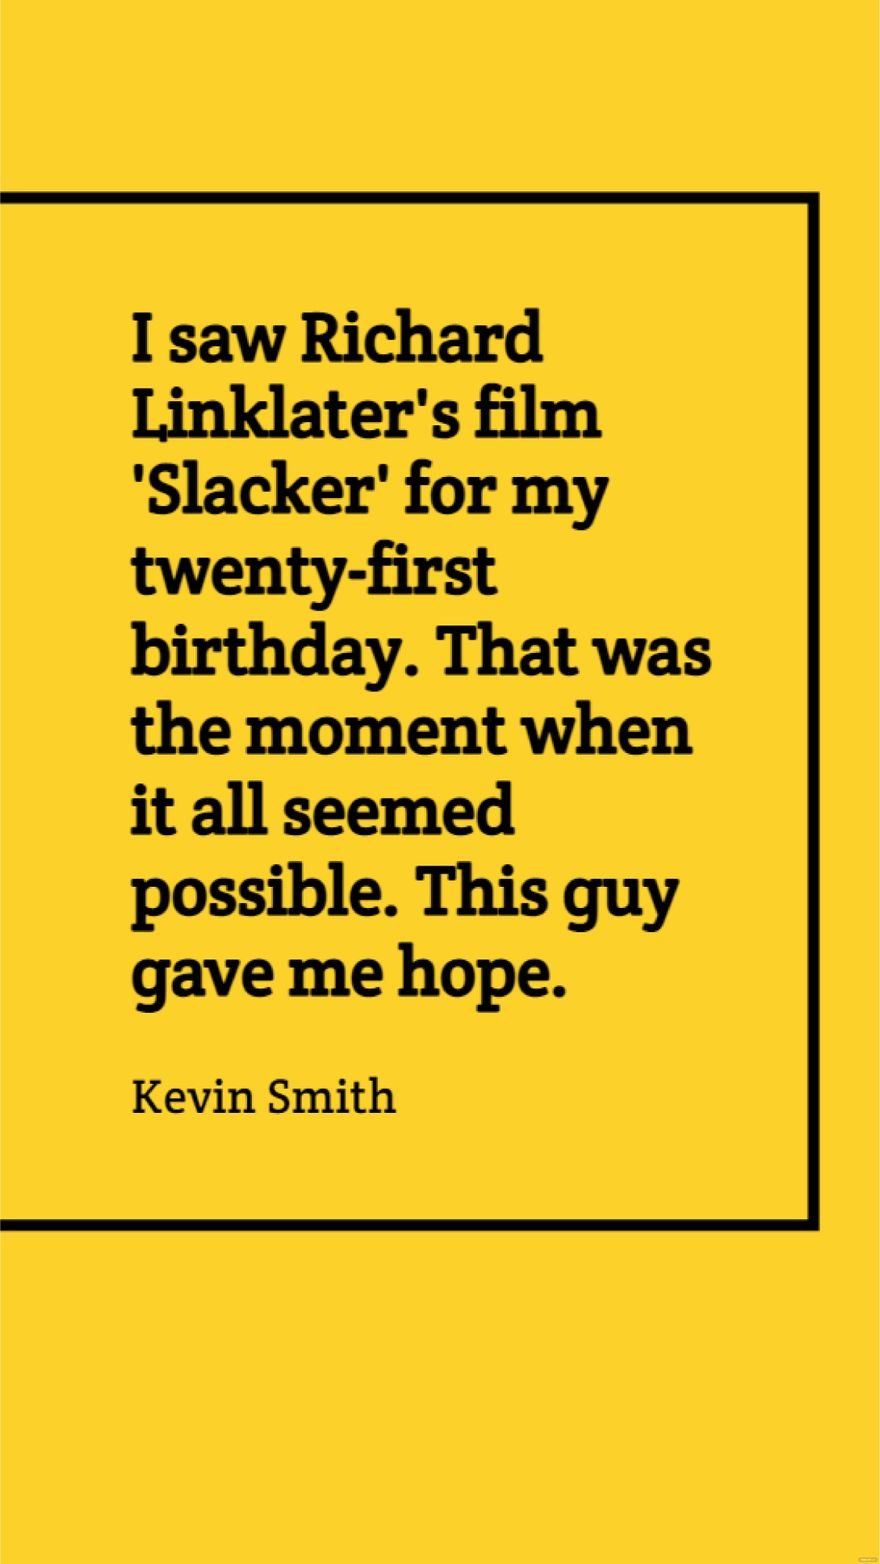 Free Kevin Smith - I saw Richard Linklater's film 'Slacker' for my twenty-first birthday. That was the moment when it all seemed possible. This guy gave me hope. in JPG